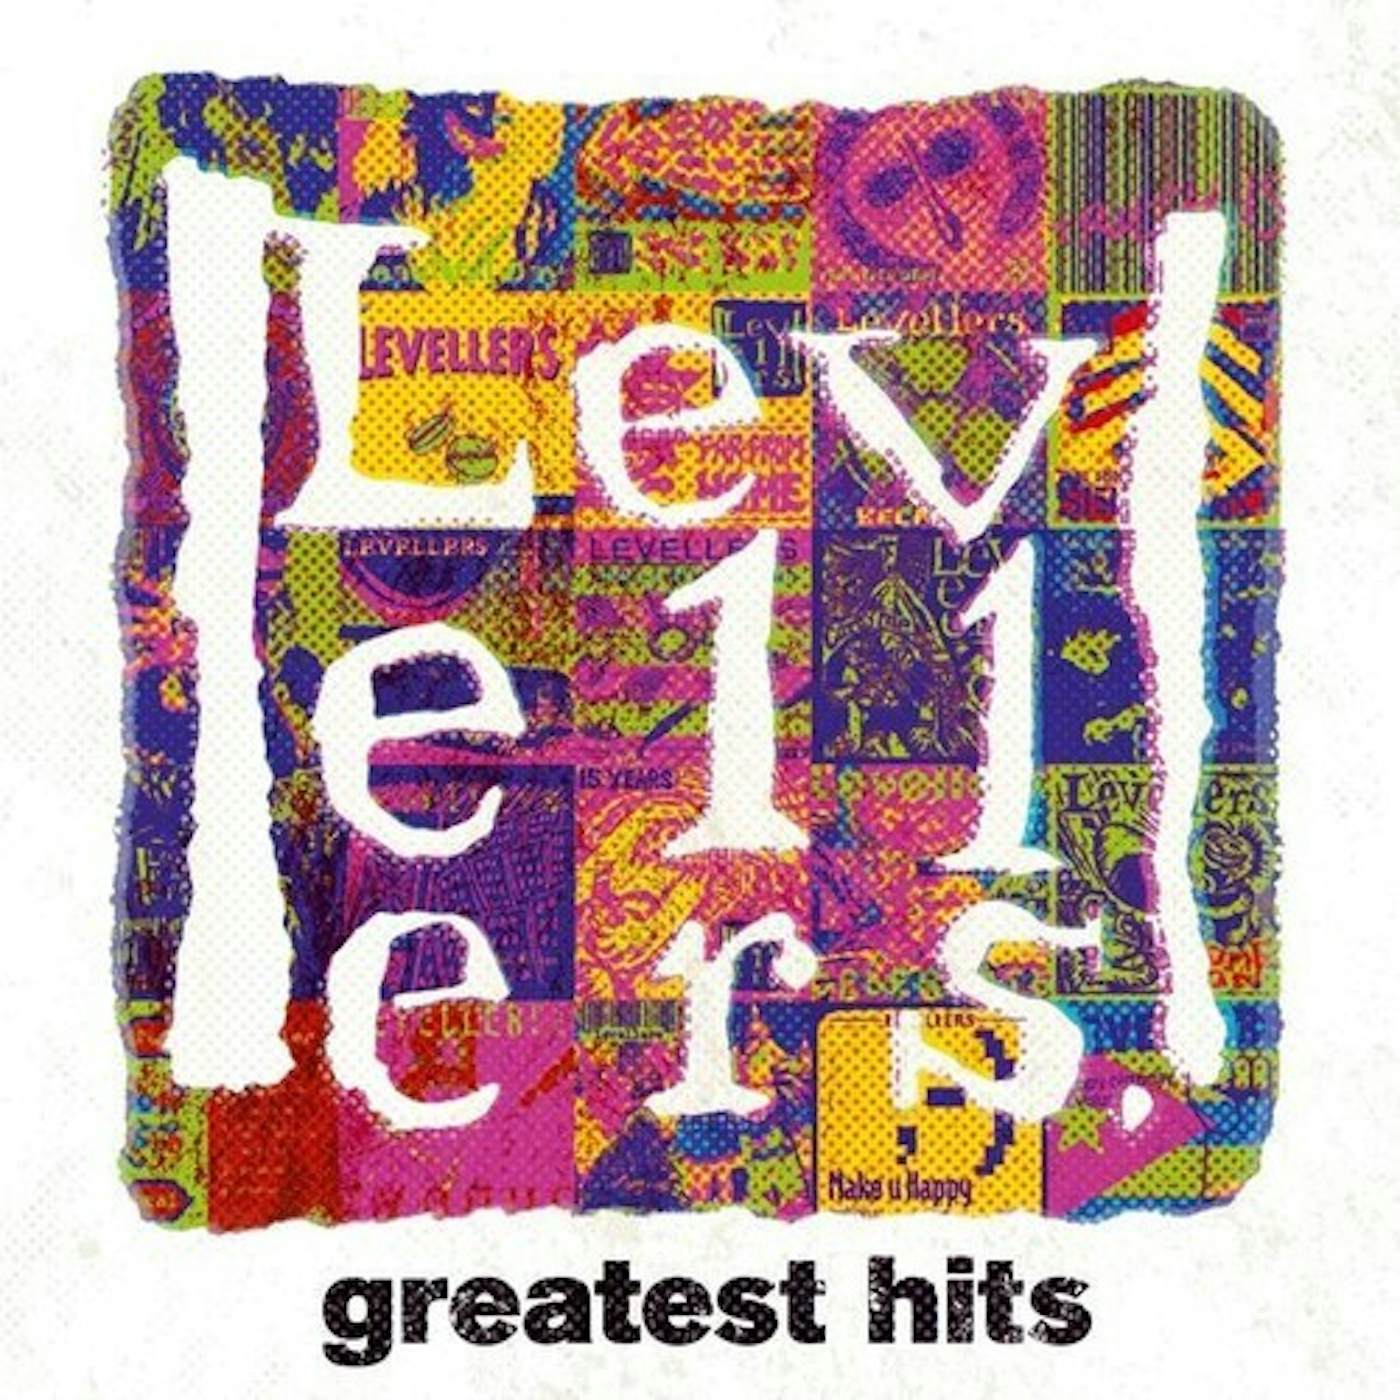 Levellers GREATEST HITS Vinyl Record